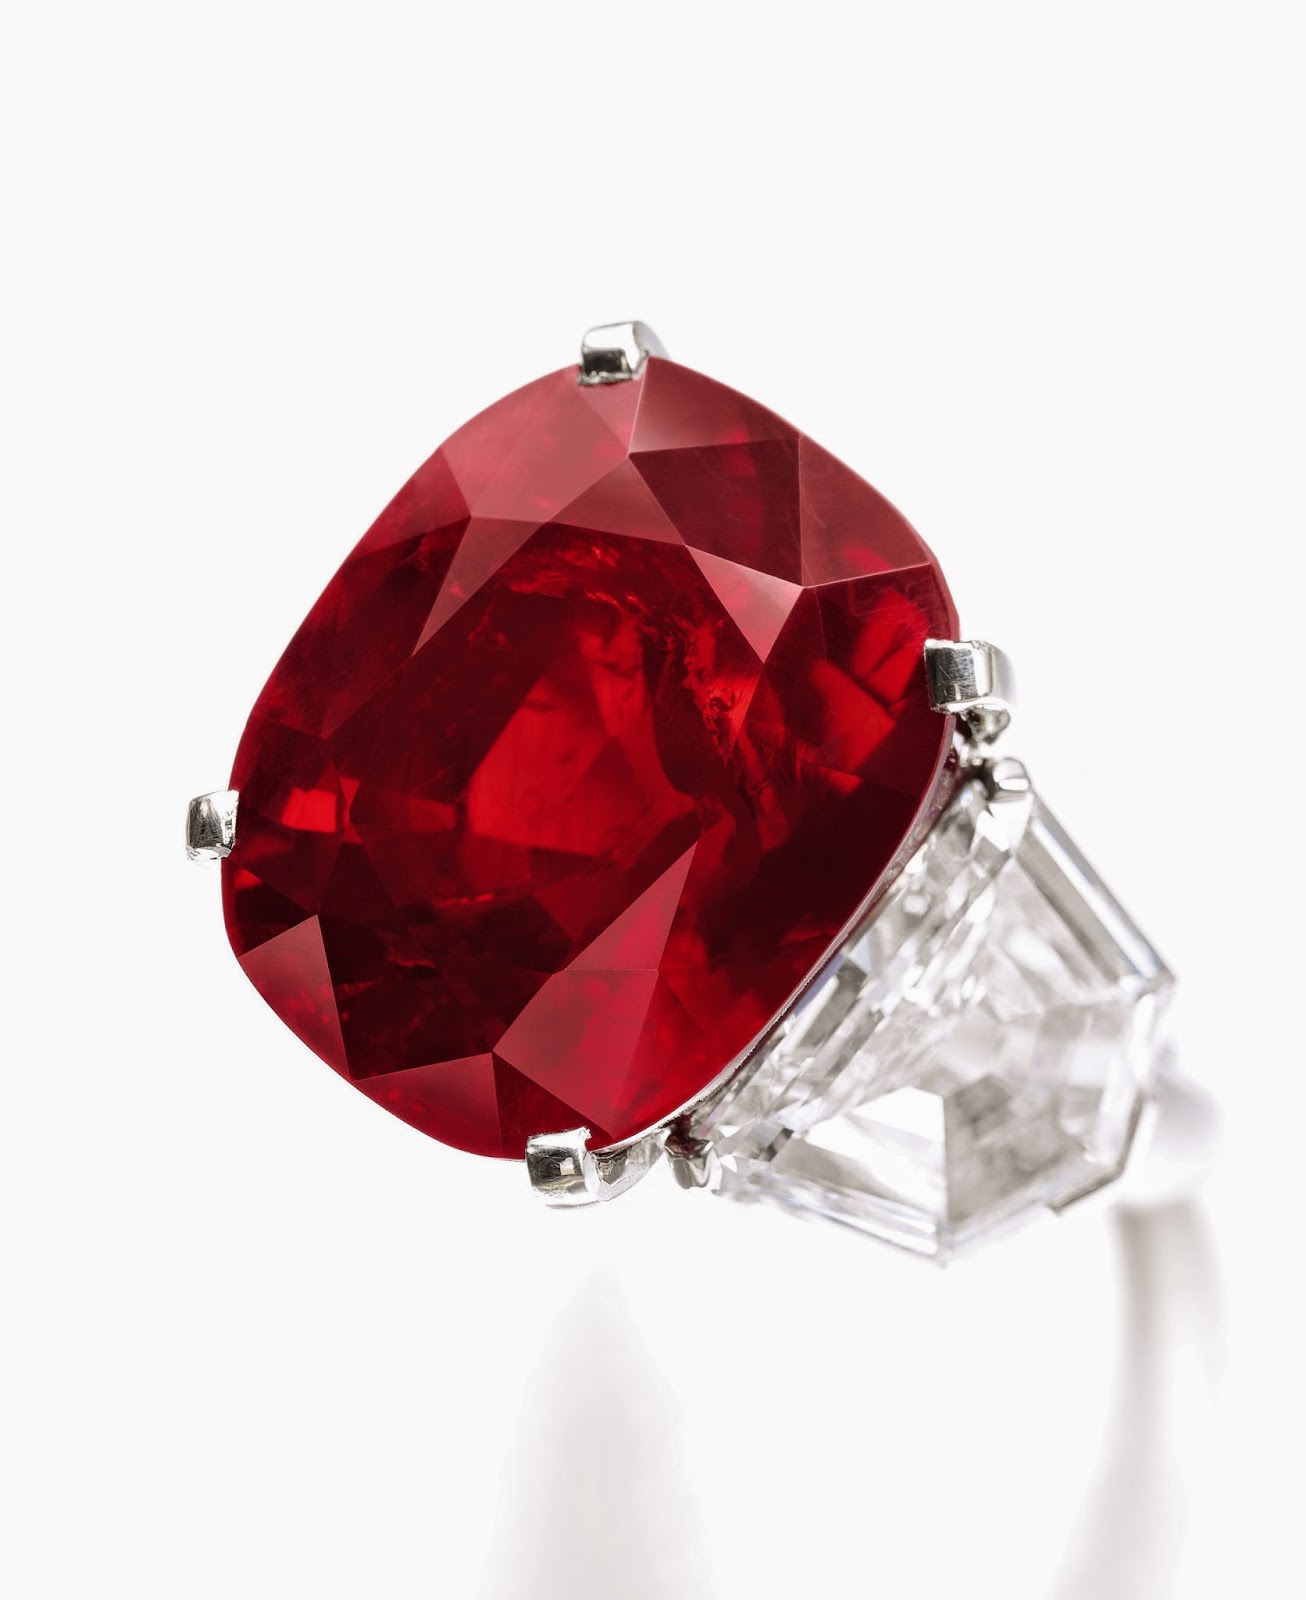 Jewelry News Network 25Carat Ruby Ring By Cartier Fetches World